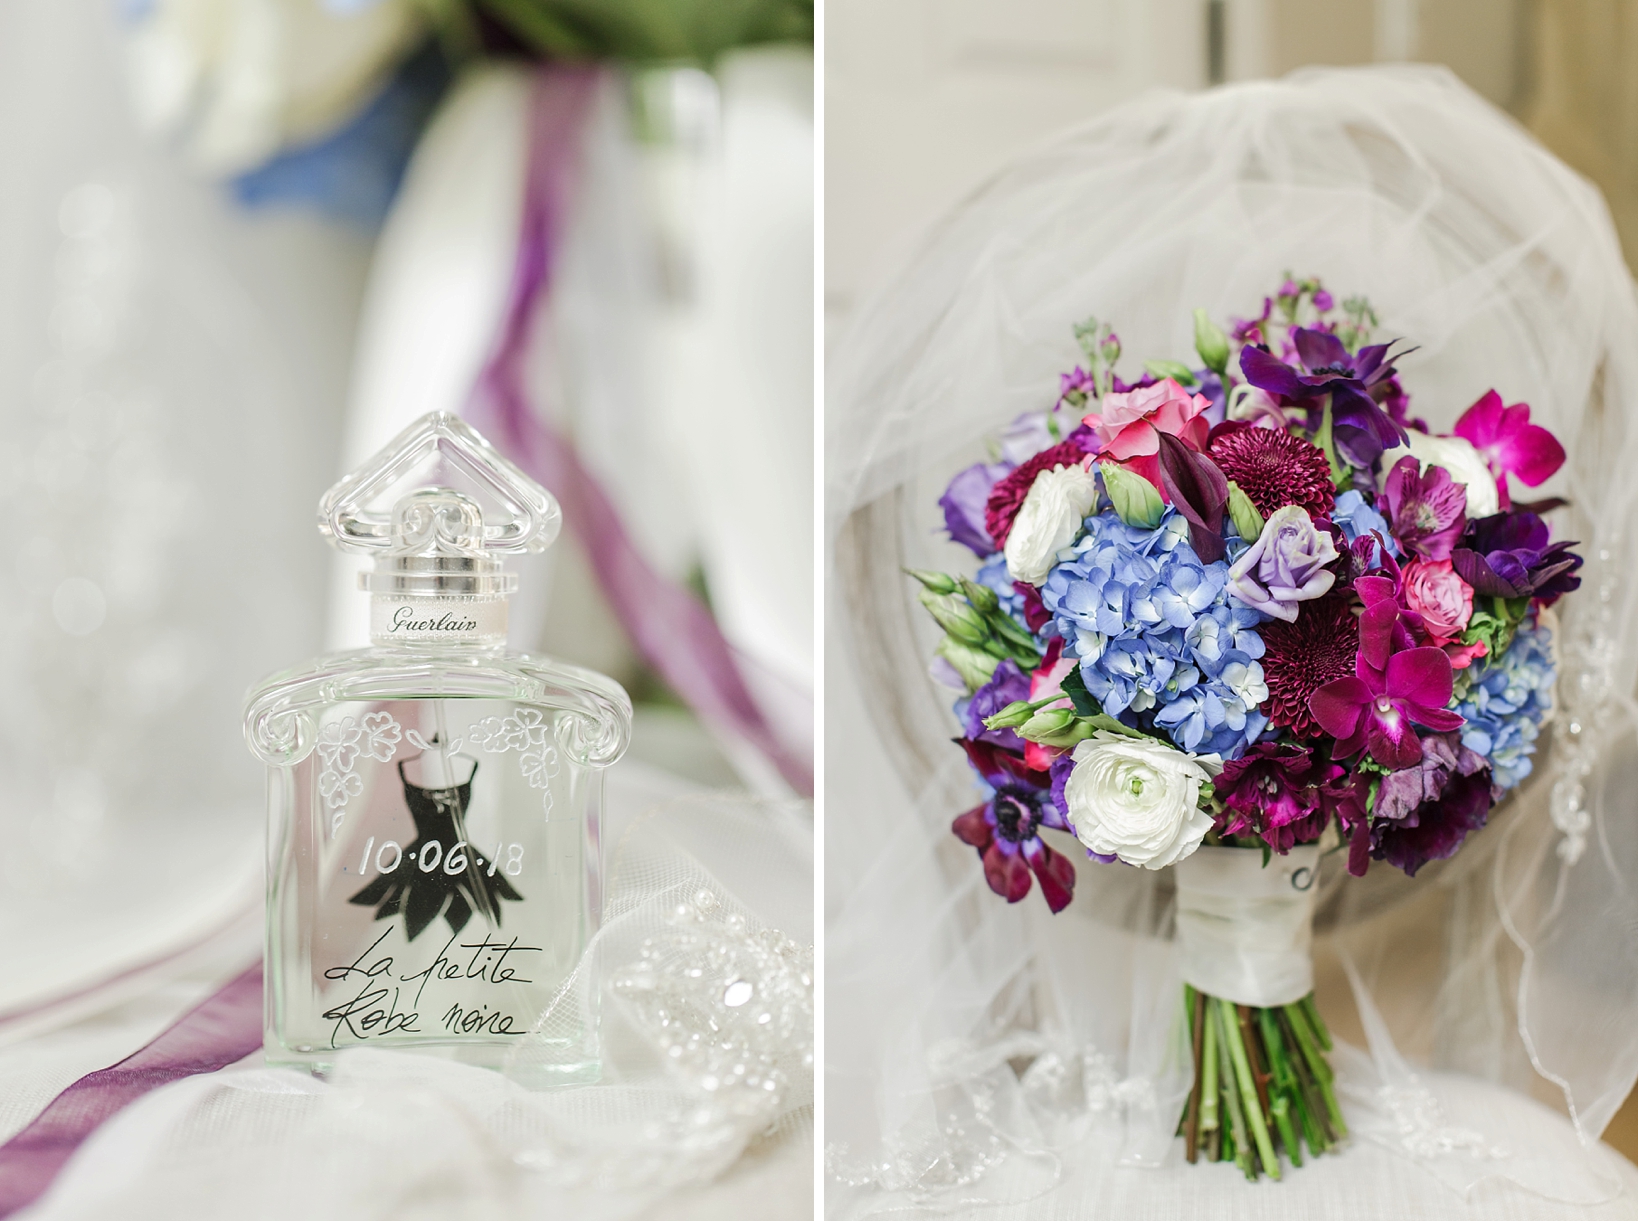 Bride's customized perfume and floral bouquet surrounded by the wedding veil by Sarah & Ben Photography